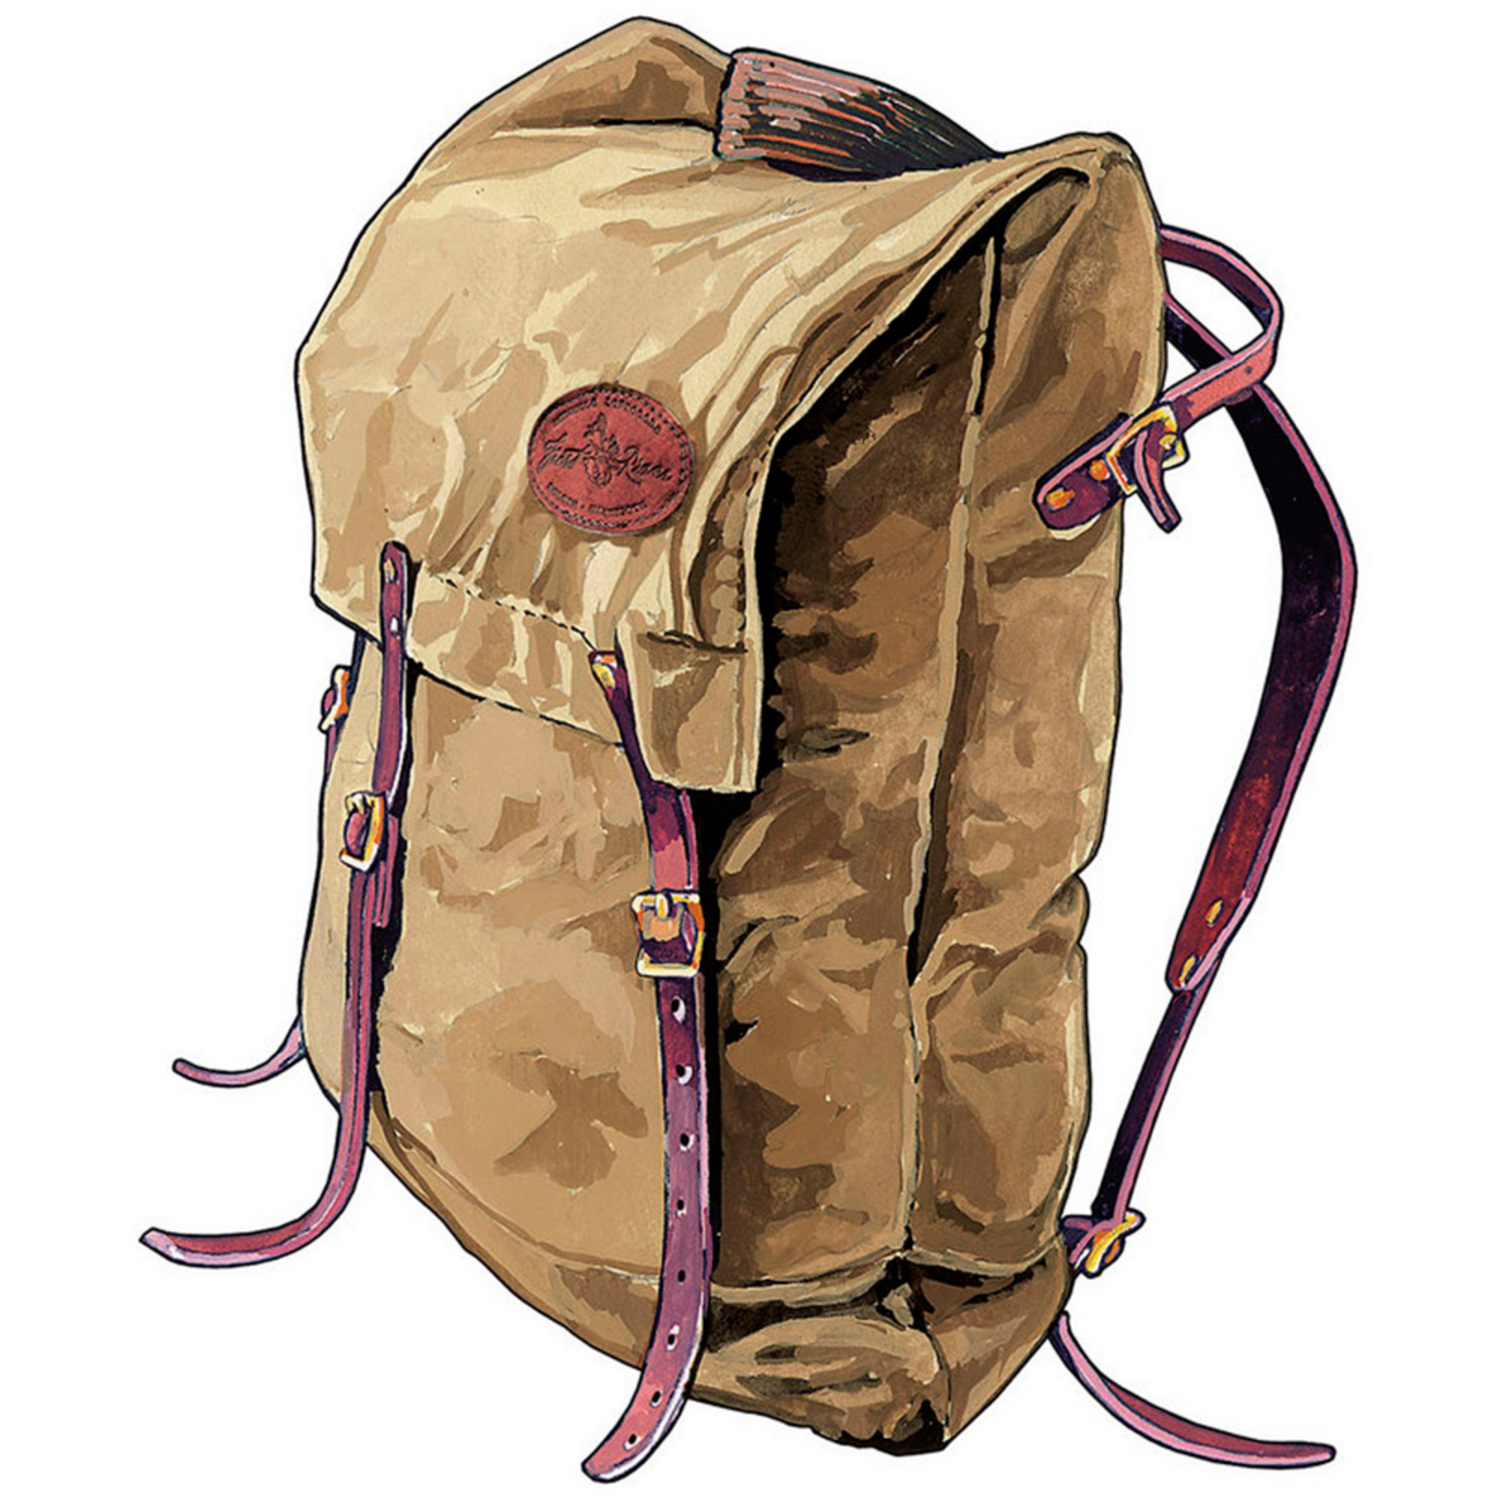 Home &gt; CANOE GEAR &gt; Canoe Portage Packs &gt; Old No. 3 Portage Pack (Item 